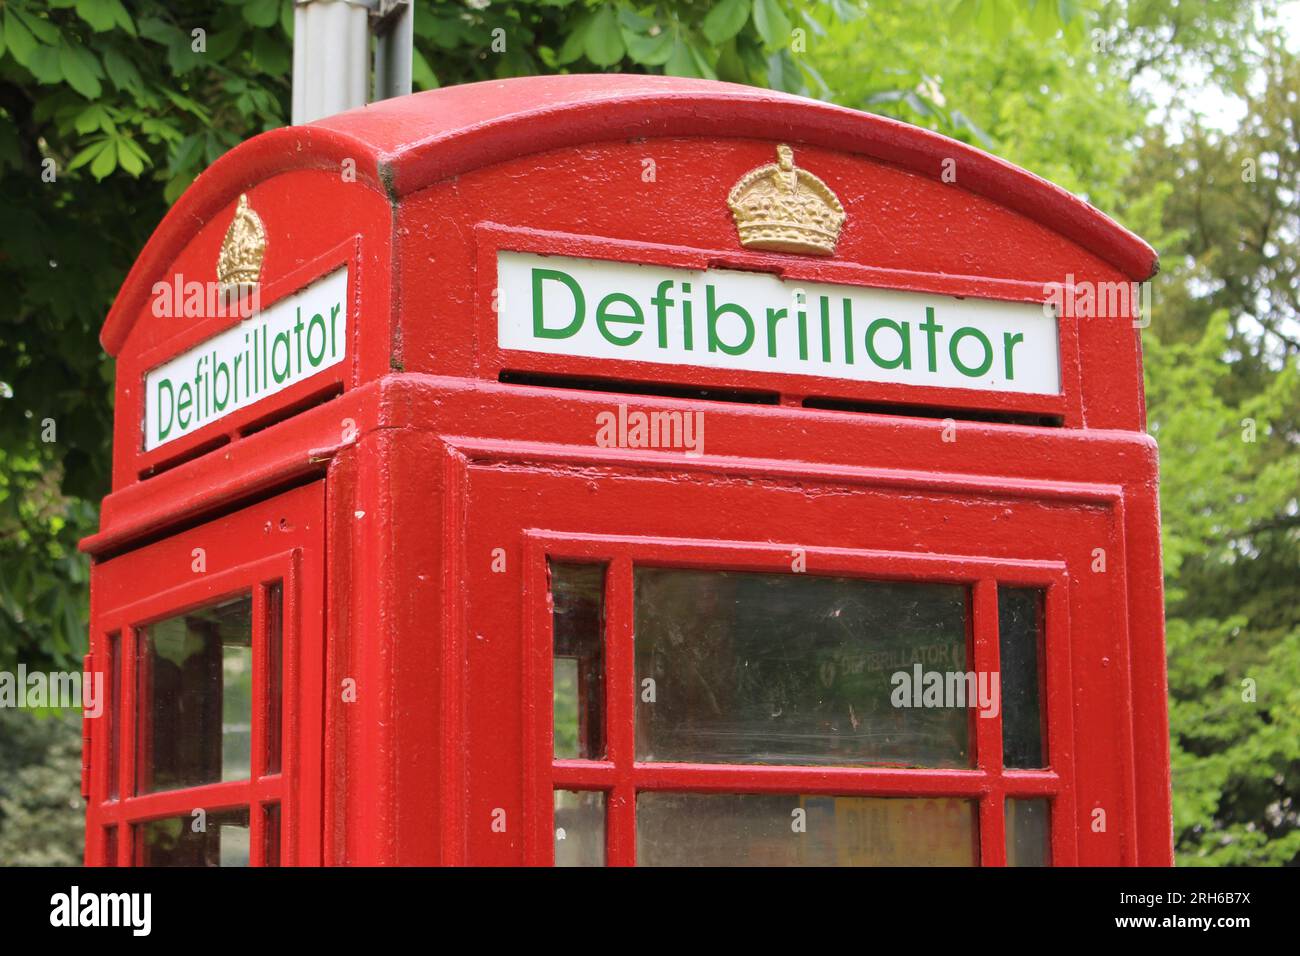 Old Red telephone box converted to hold defibrillator. Typical British telephone booth reimagined as defibrillator station (Cheltenham, England) Stock Photo